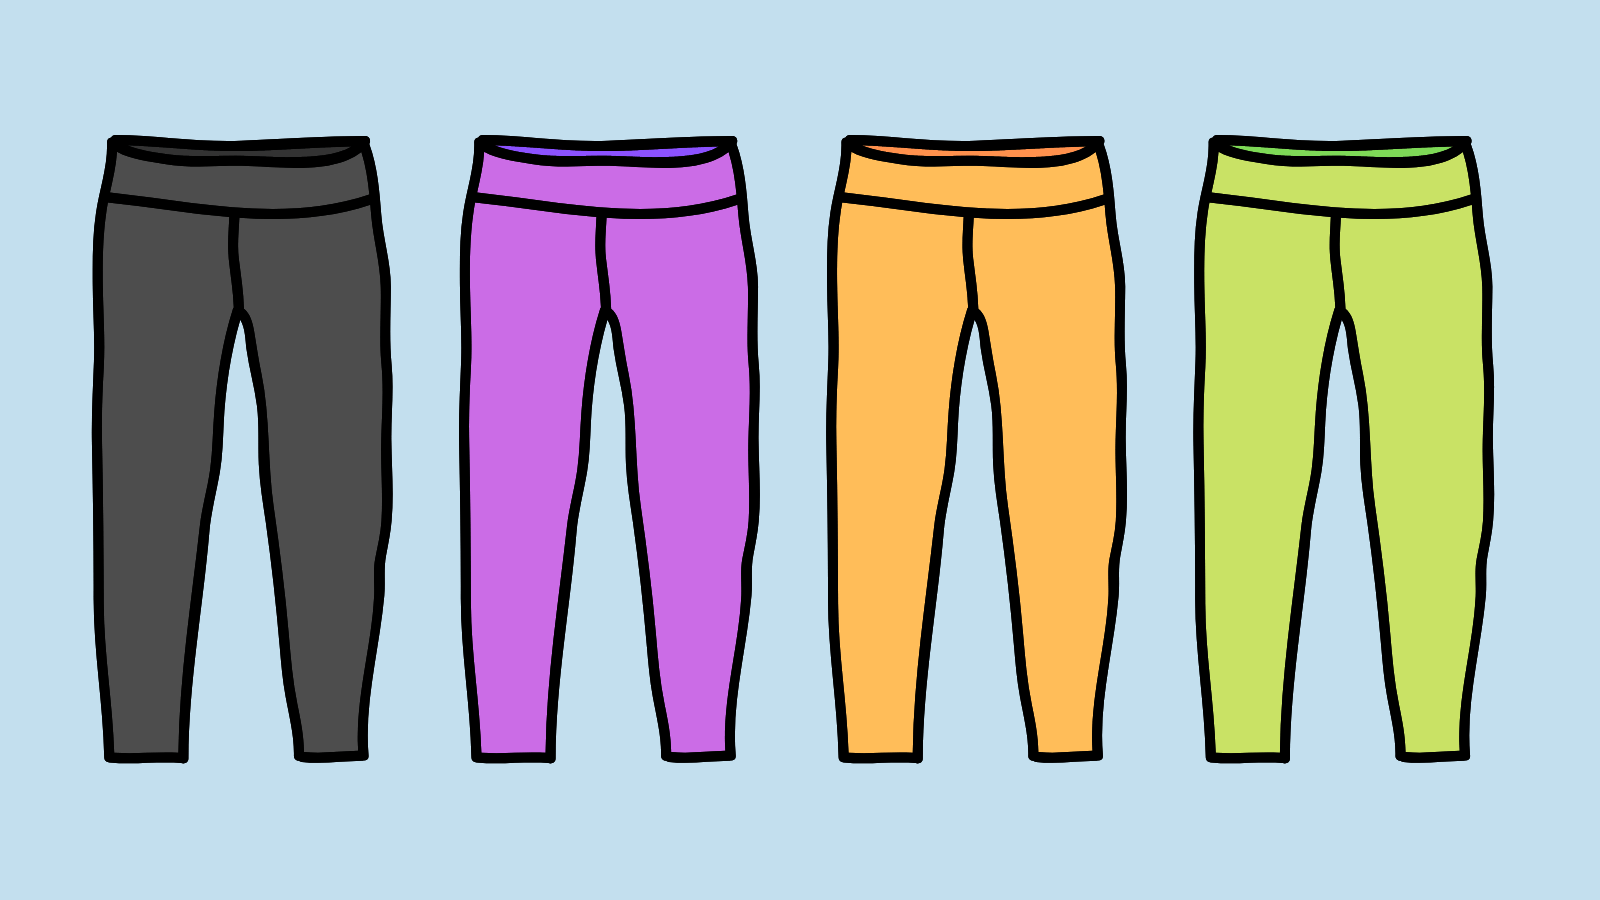 Four pairs of leggings in different colors one black, one purple, one orange, and one green